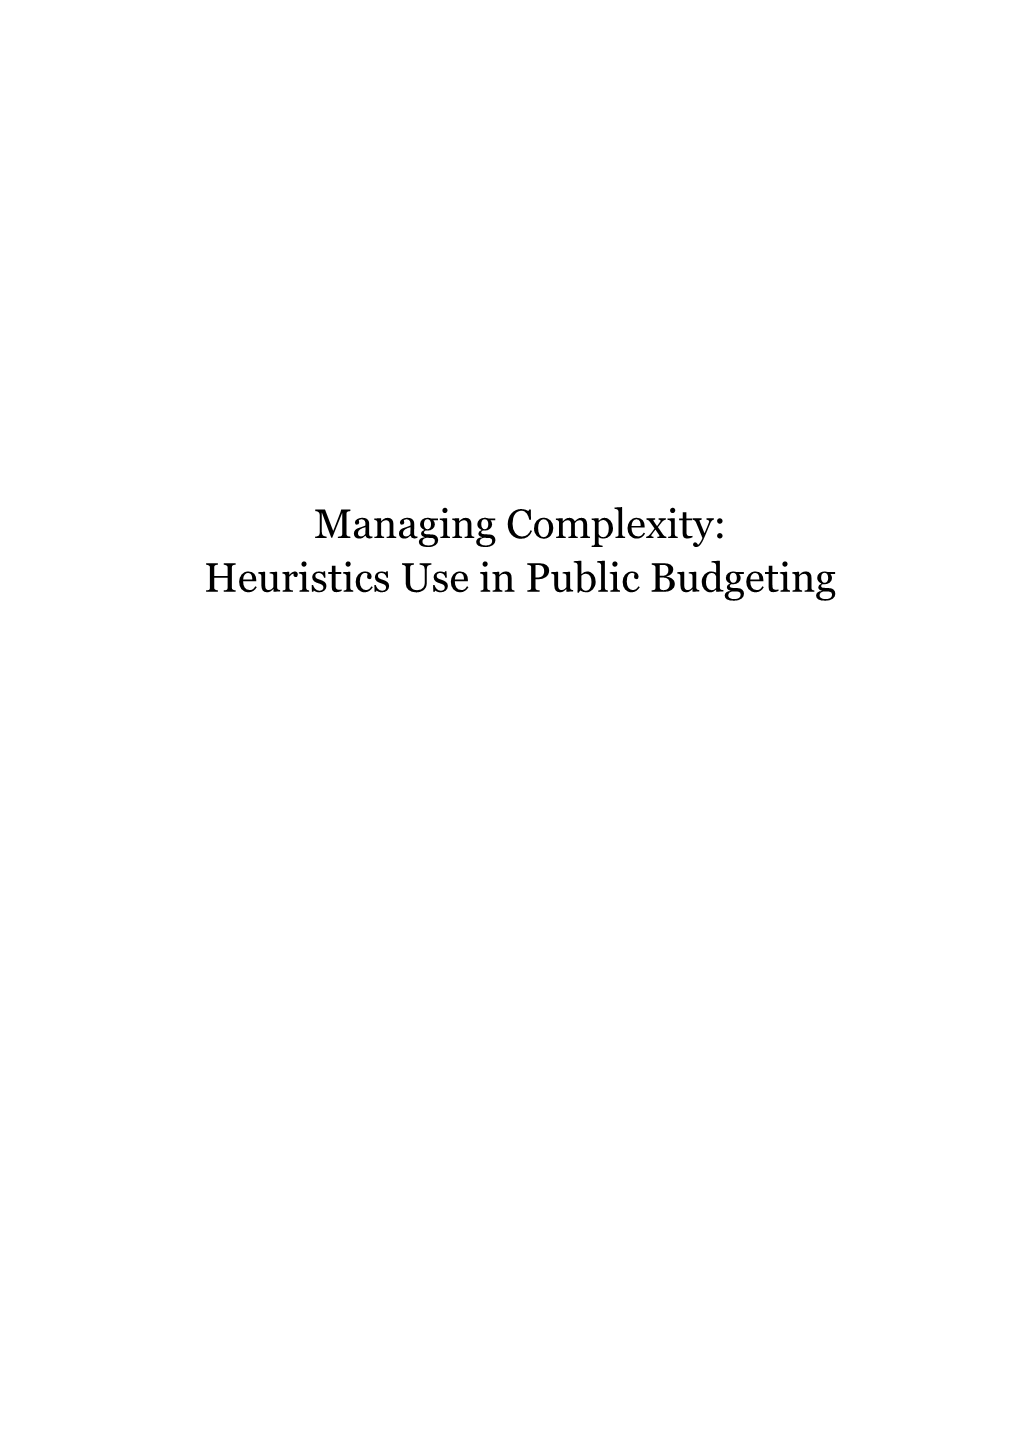 Managing Complexity: Heuristics Use in Public Budgeting